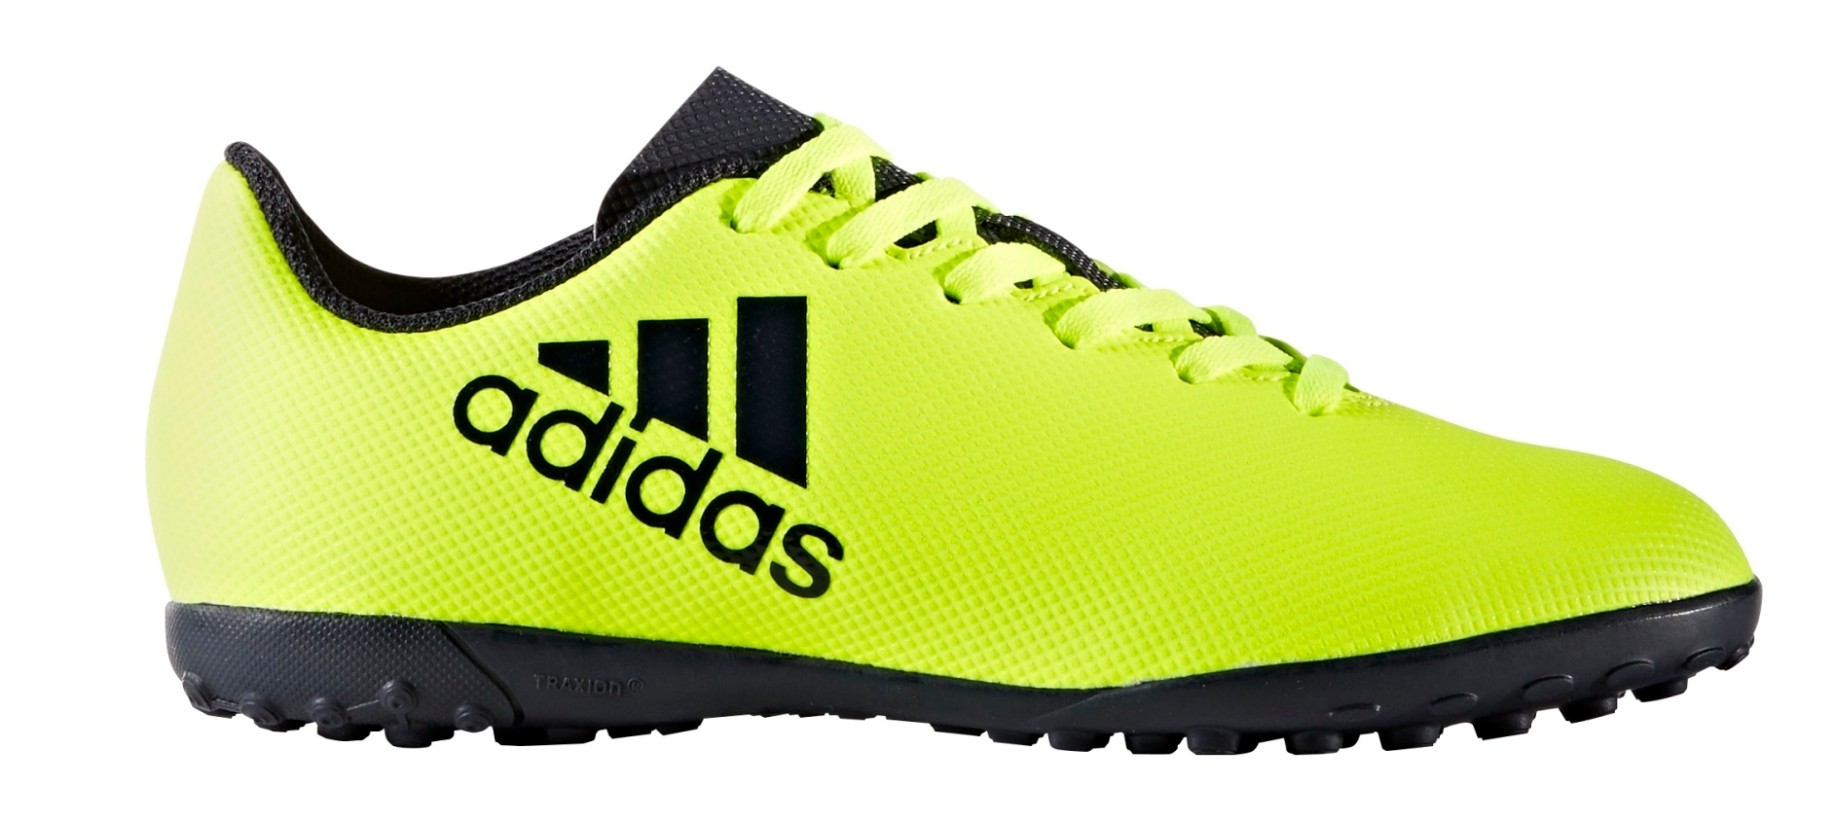 adidas x 17.4 tf review